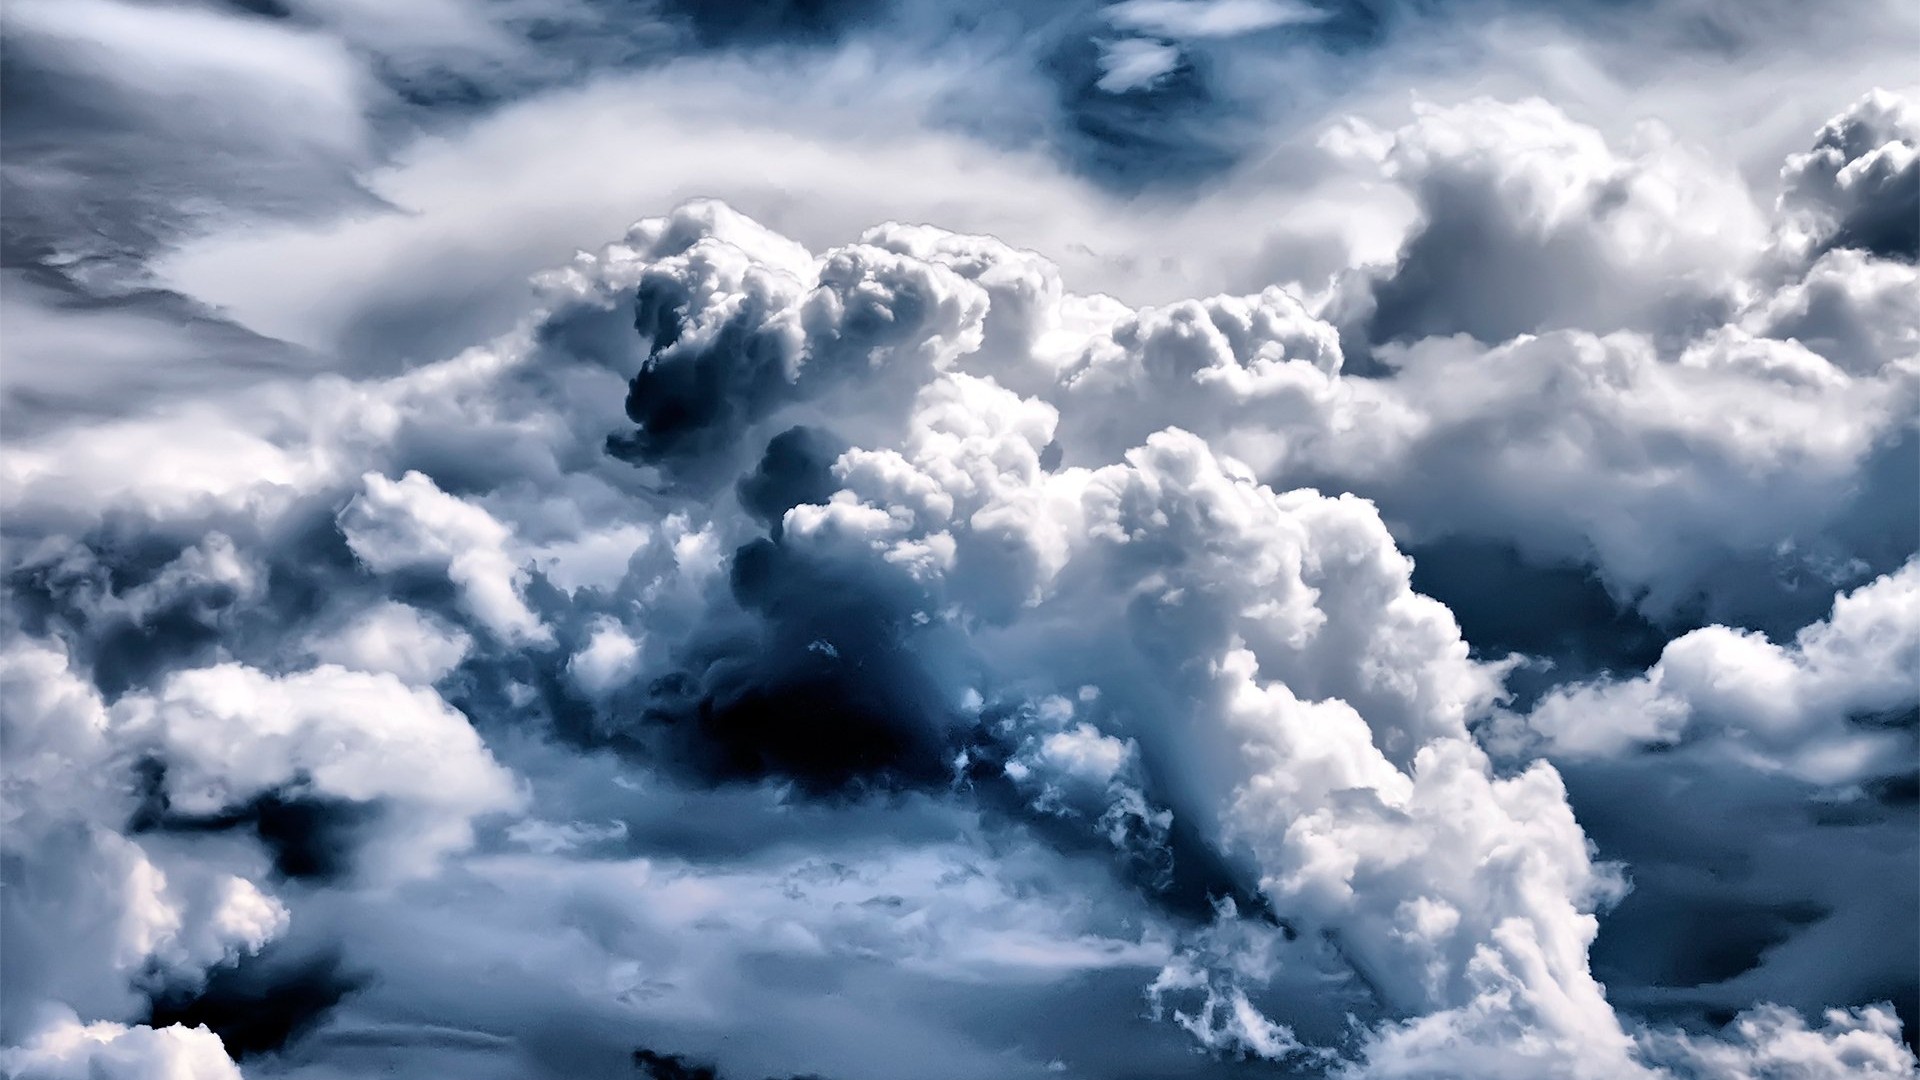 1080p Clouds Images Hd - 1920x1080 Wallpaper 